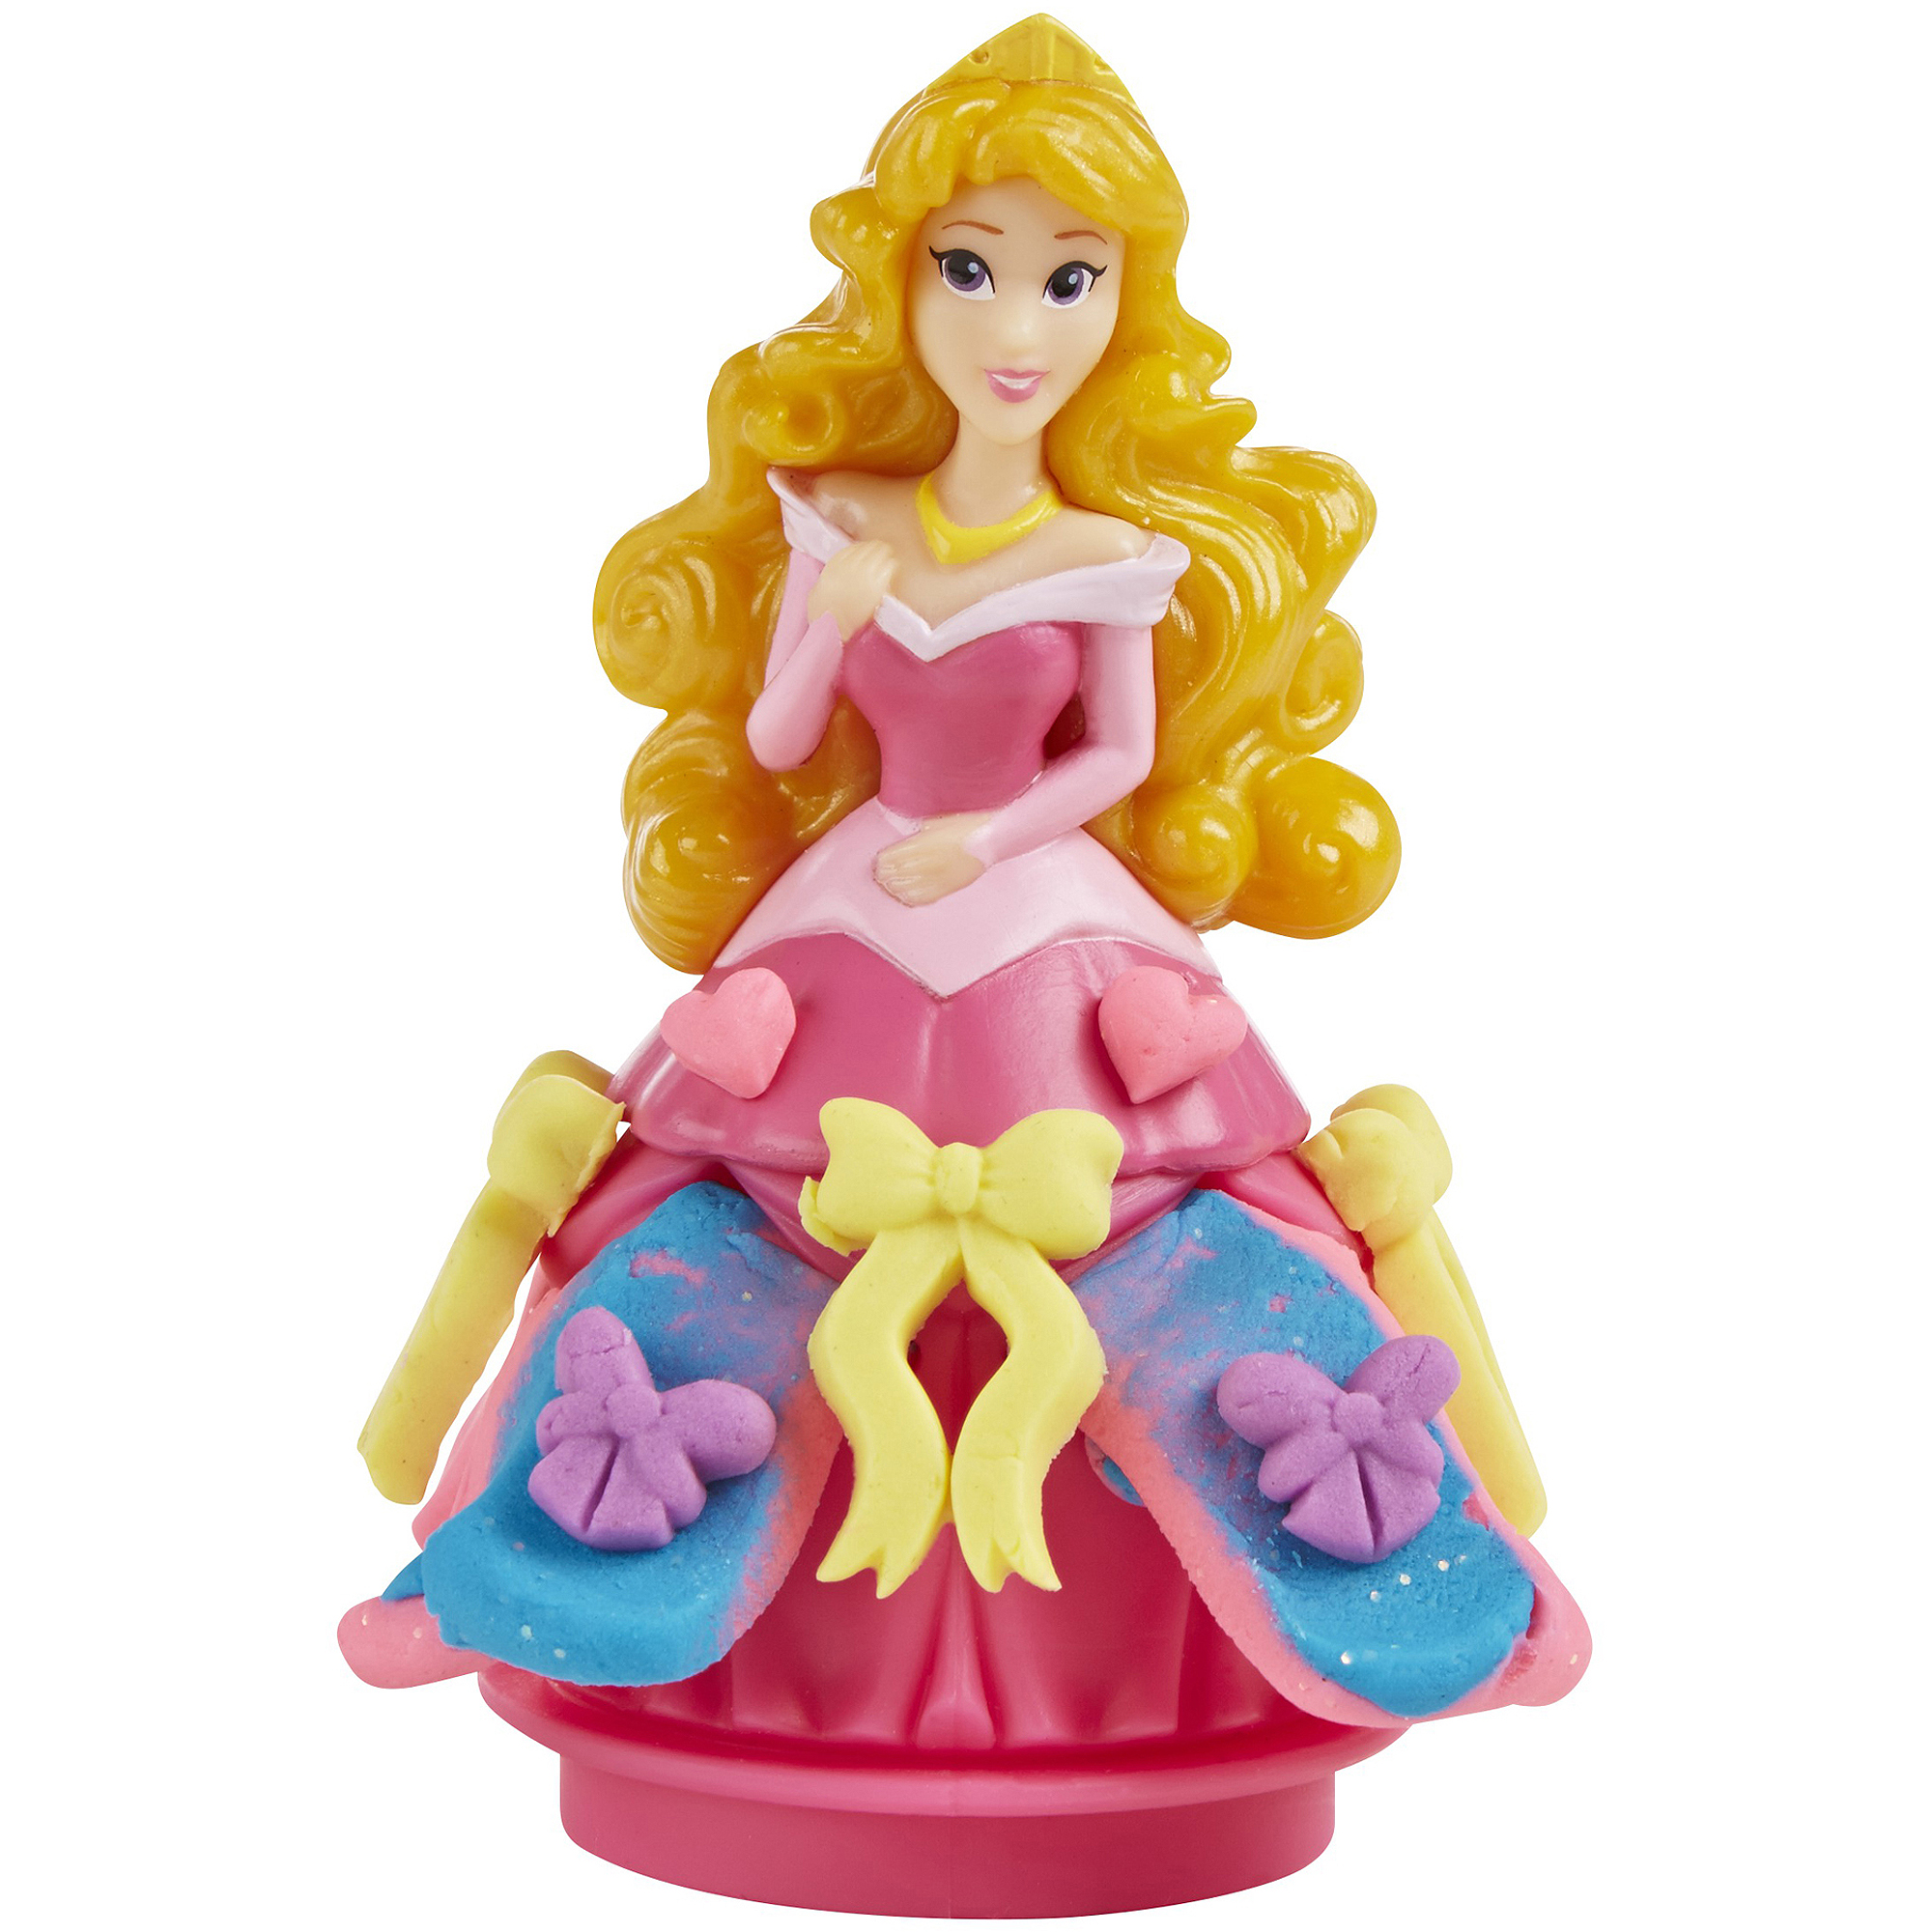 Play-Doh Disney Mix 'N Match Magical Designs Palace Set with Princess Aurora & 4 Cans of Sparkle Play-Doh - image 4 of 13